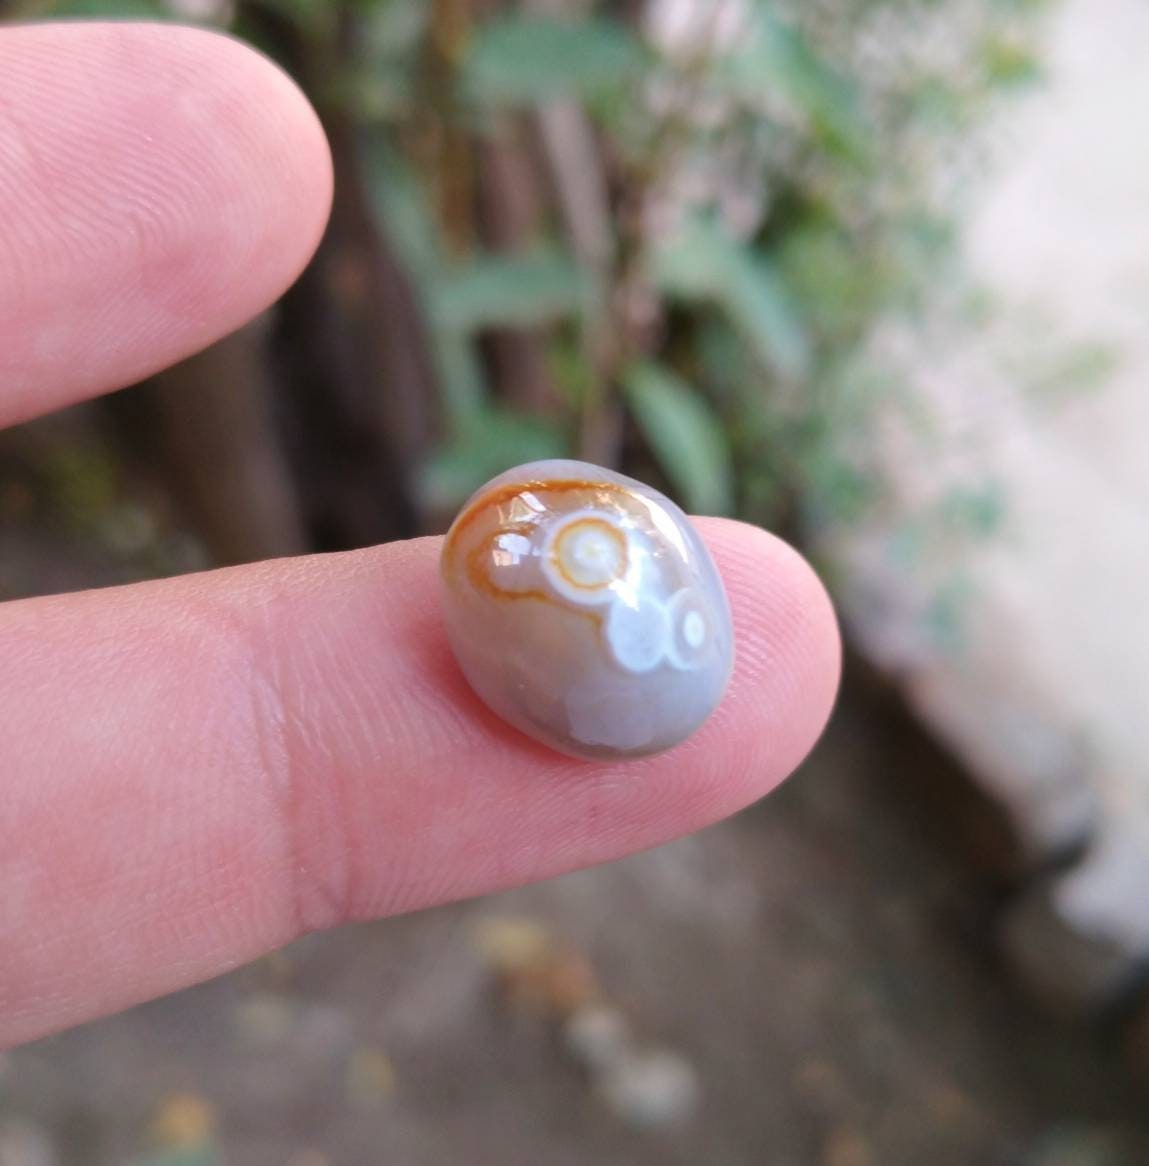 ARSAA GEMS AND MINERALSNatural good quality beautiful 21 carats oval shapes small lot of banded eye fine agate cabochons - Premium  from ARSAA GEMS AND MINERALS - Just $30.00! Shop now at ARSAA GEMS AND MINERALS